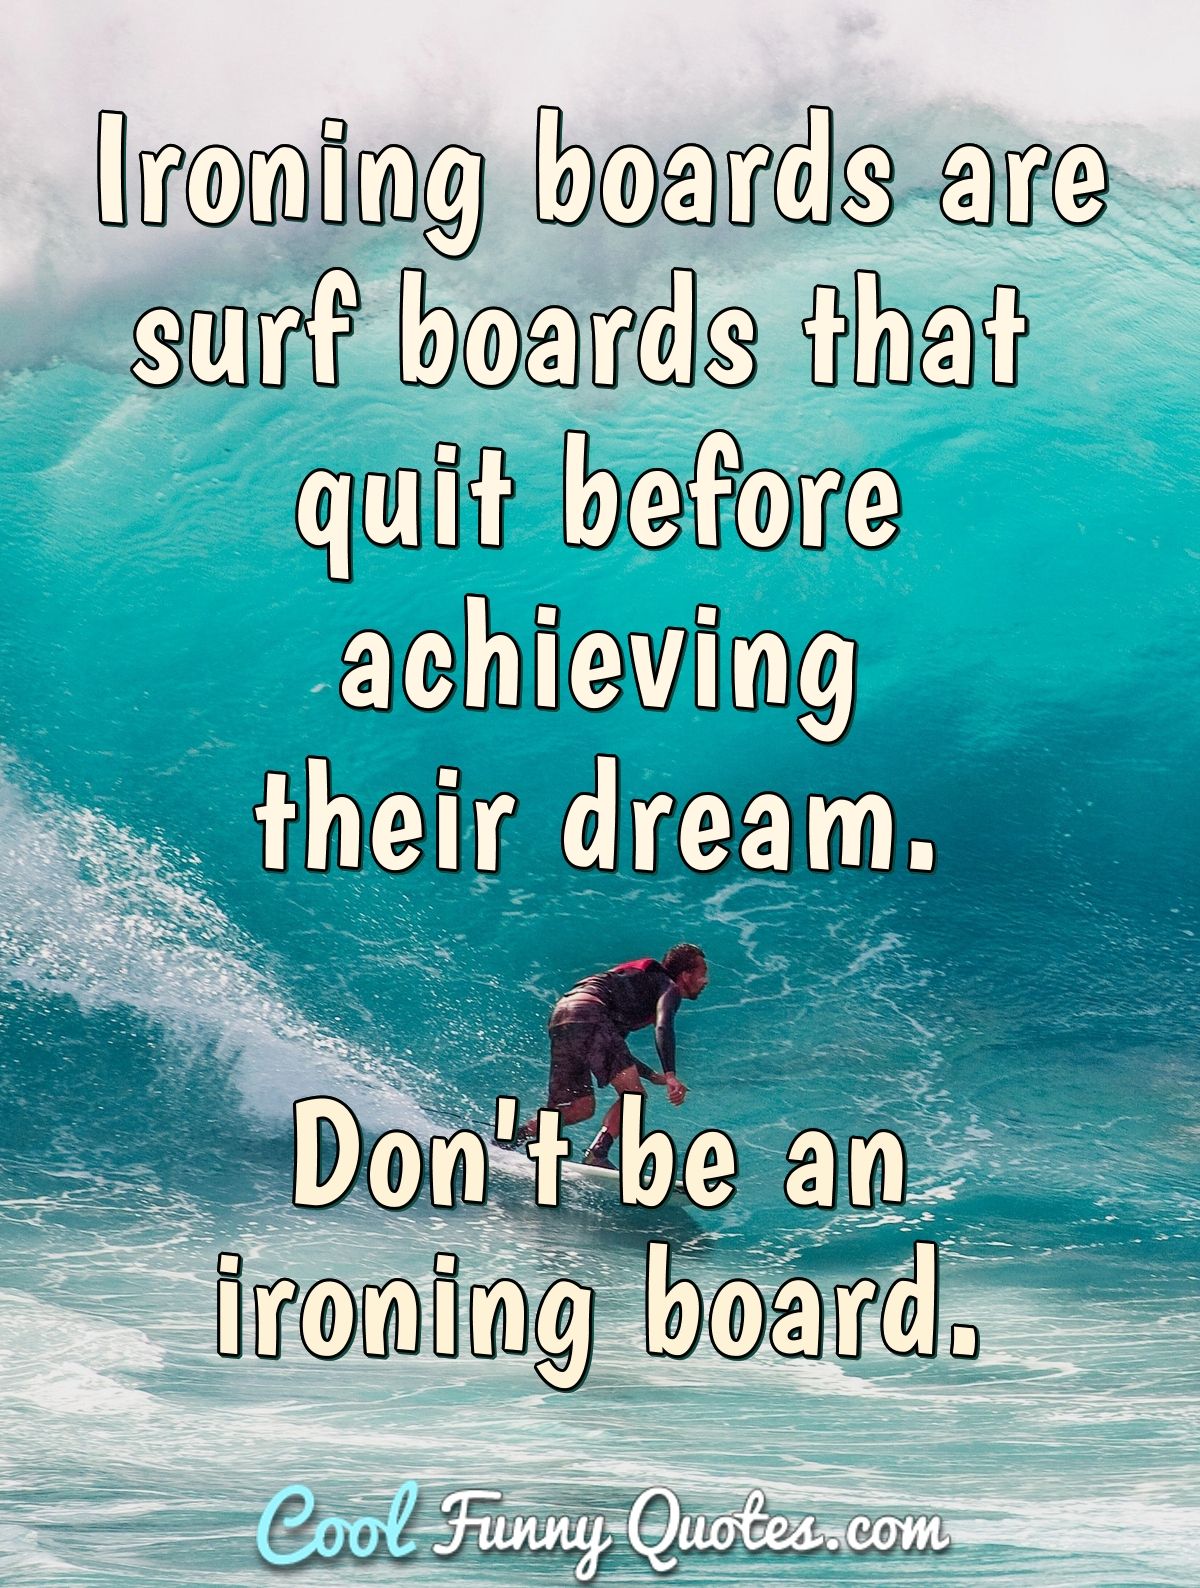 Ironing boards are surf boards that quit before achieving their dream. Don't be an ironing board. - Anonymous